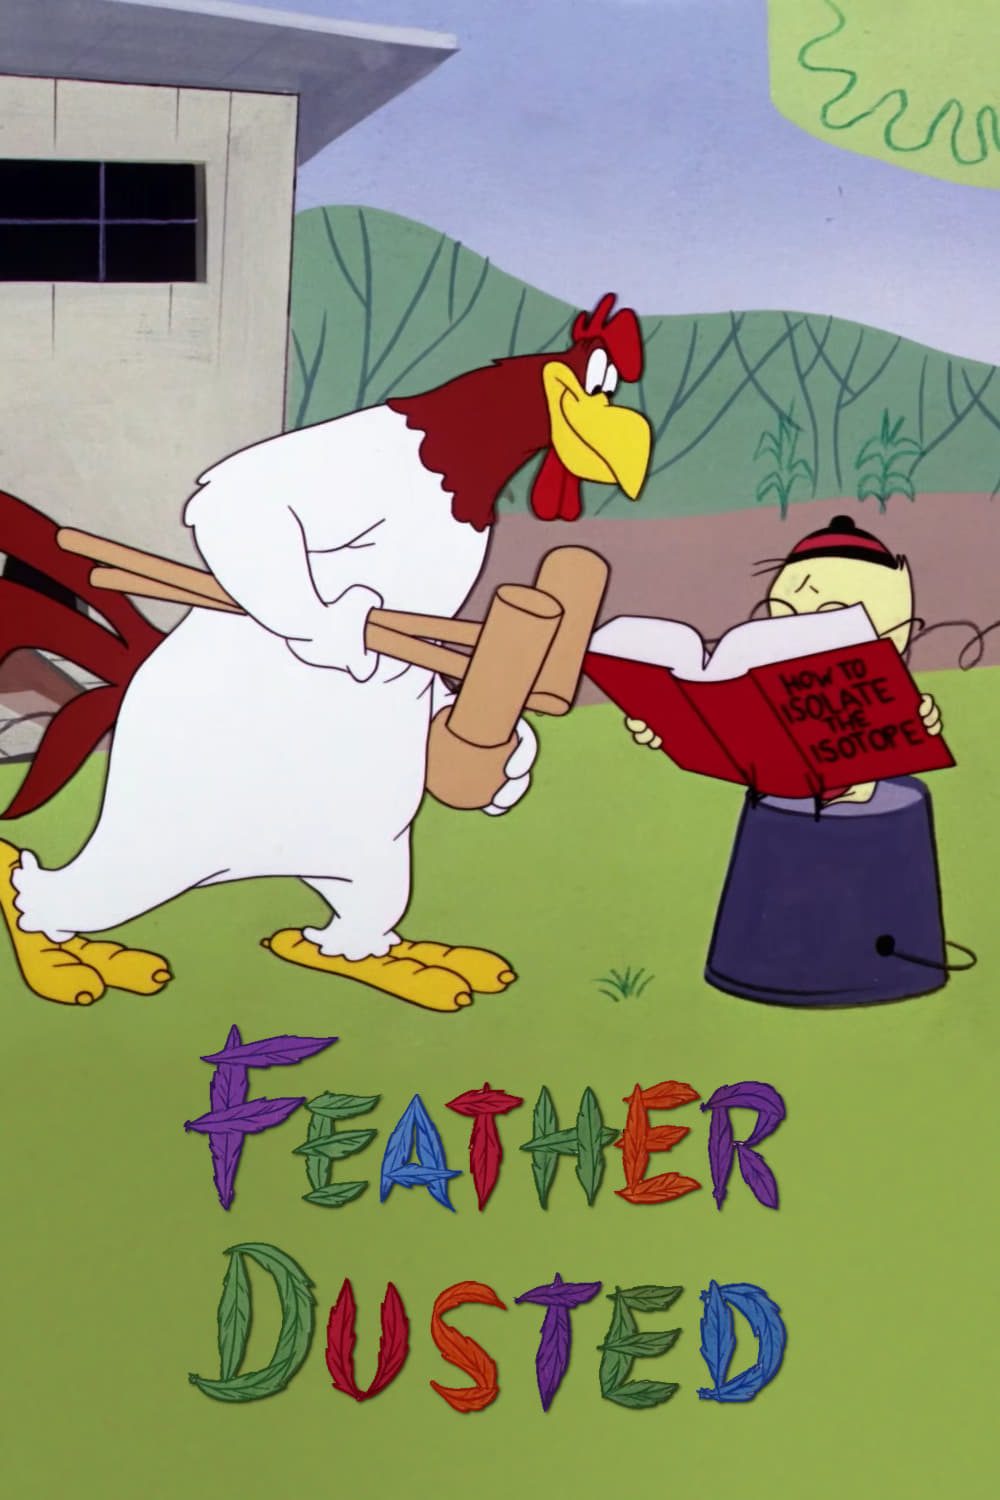 Feather Dusted (1955) постер